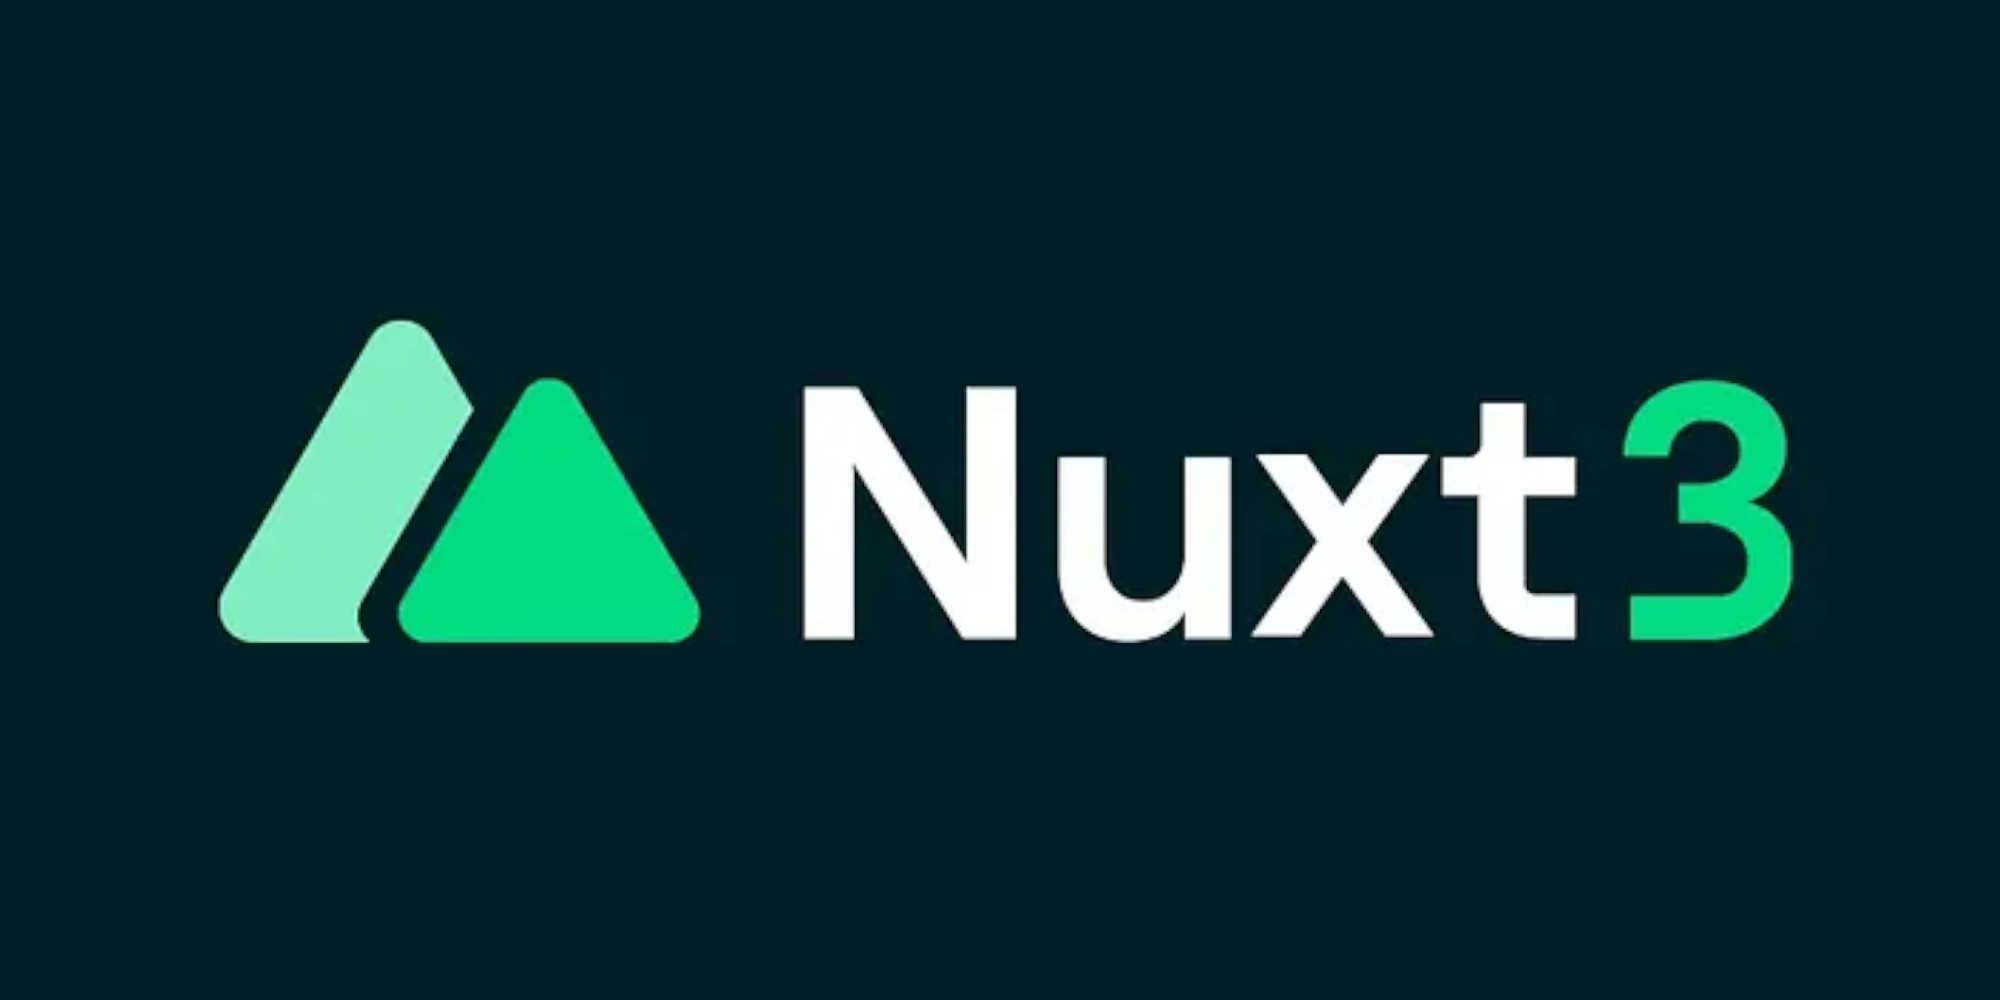 Cover Image for Getting Started with Nuxt 3 and Tailwind CSS